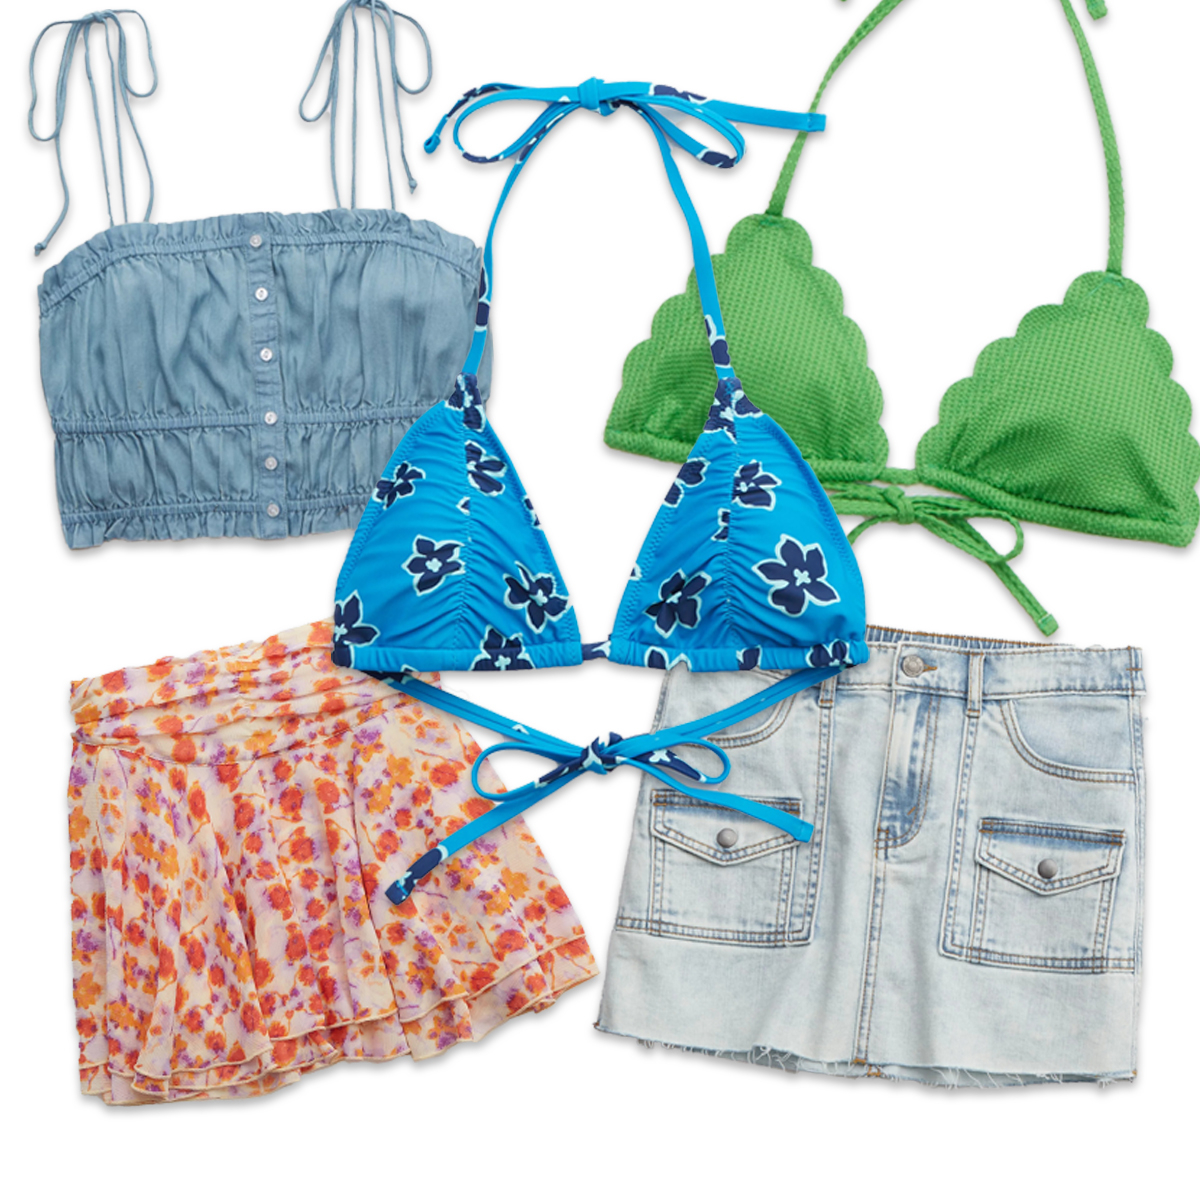 Aerie’s Sale Section Has $15 Bikinis, $20 Skirts & More 60% Off Deals